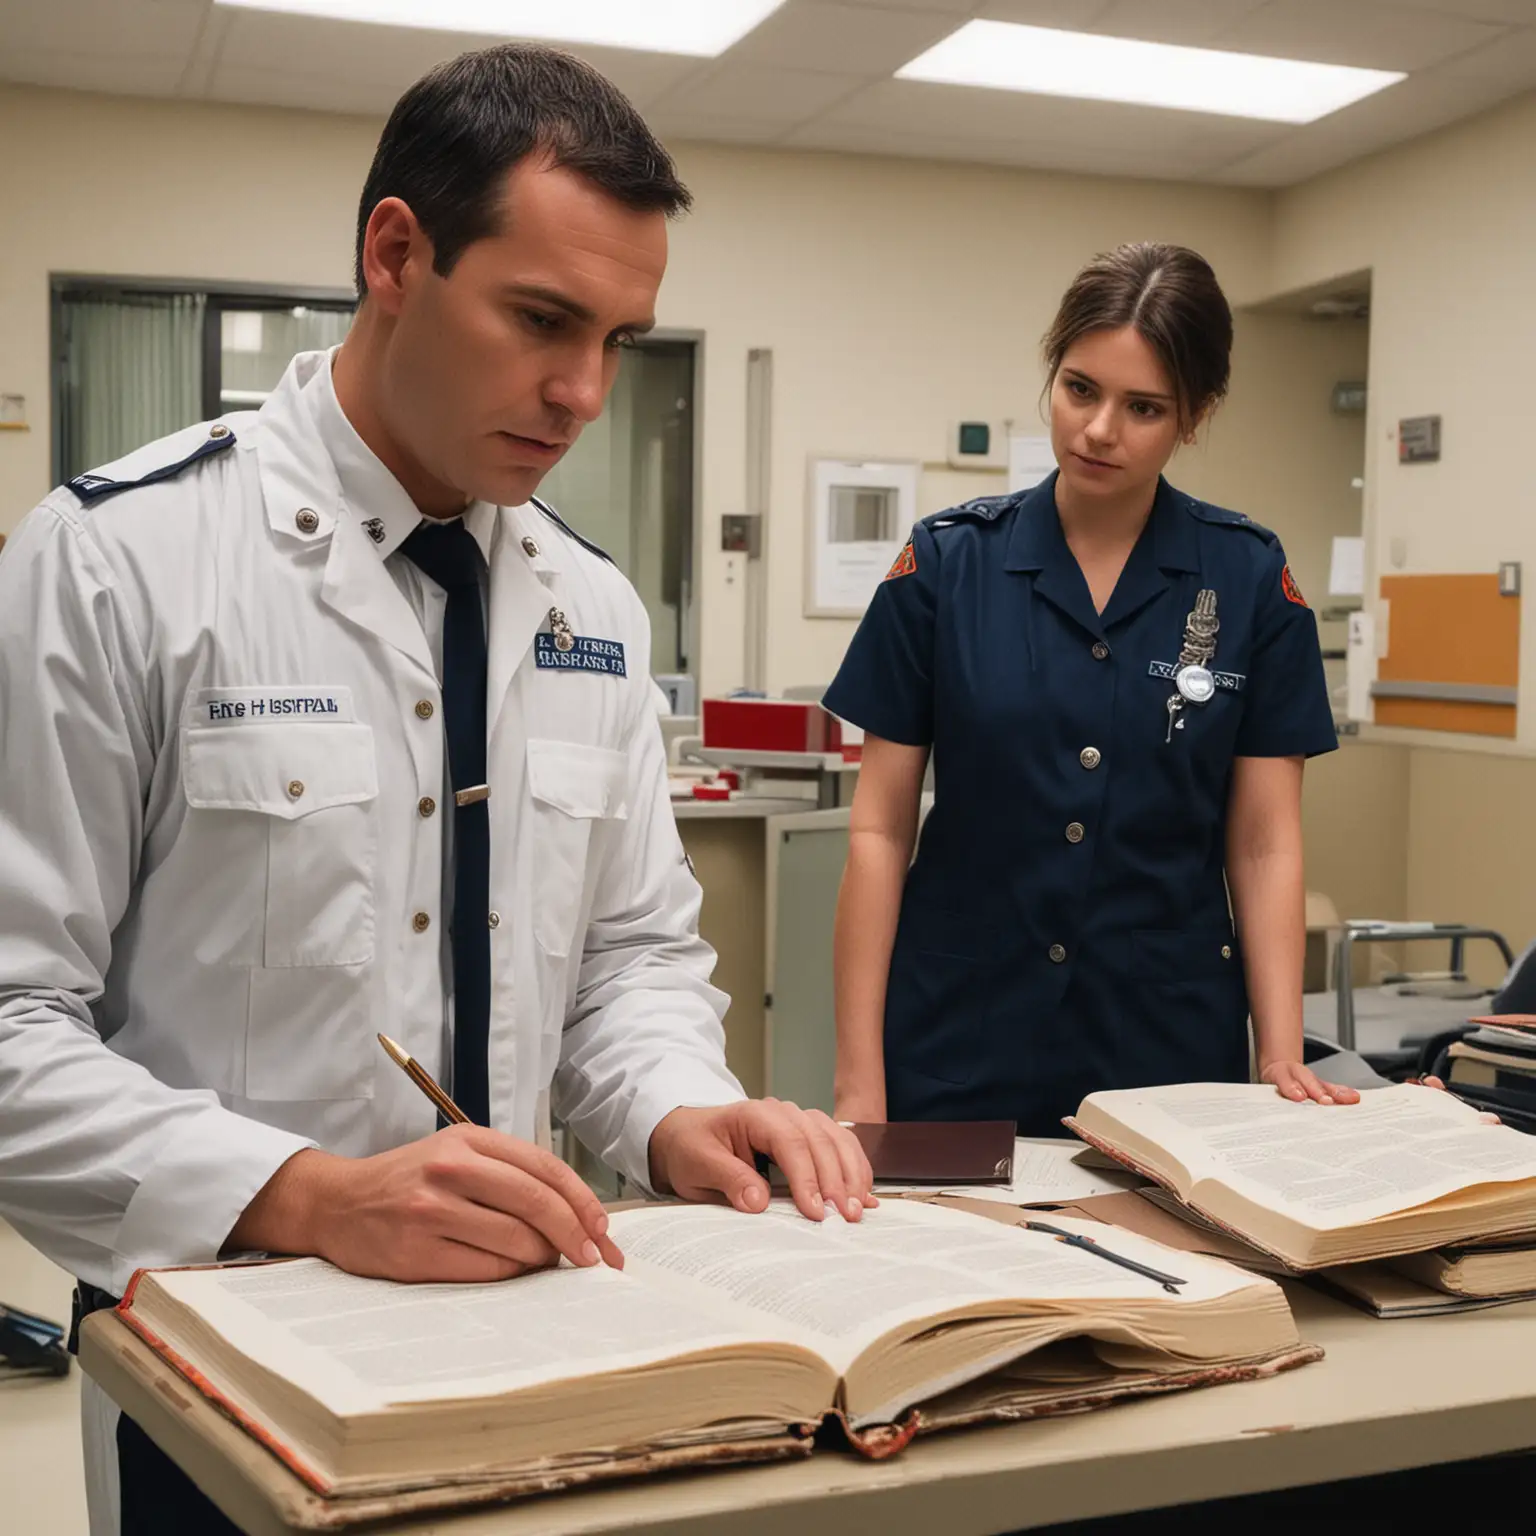 As the officer is checking the books, he turns to the head of the hospital and asks, 